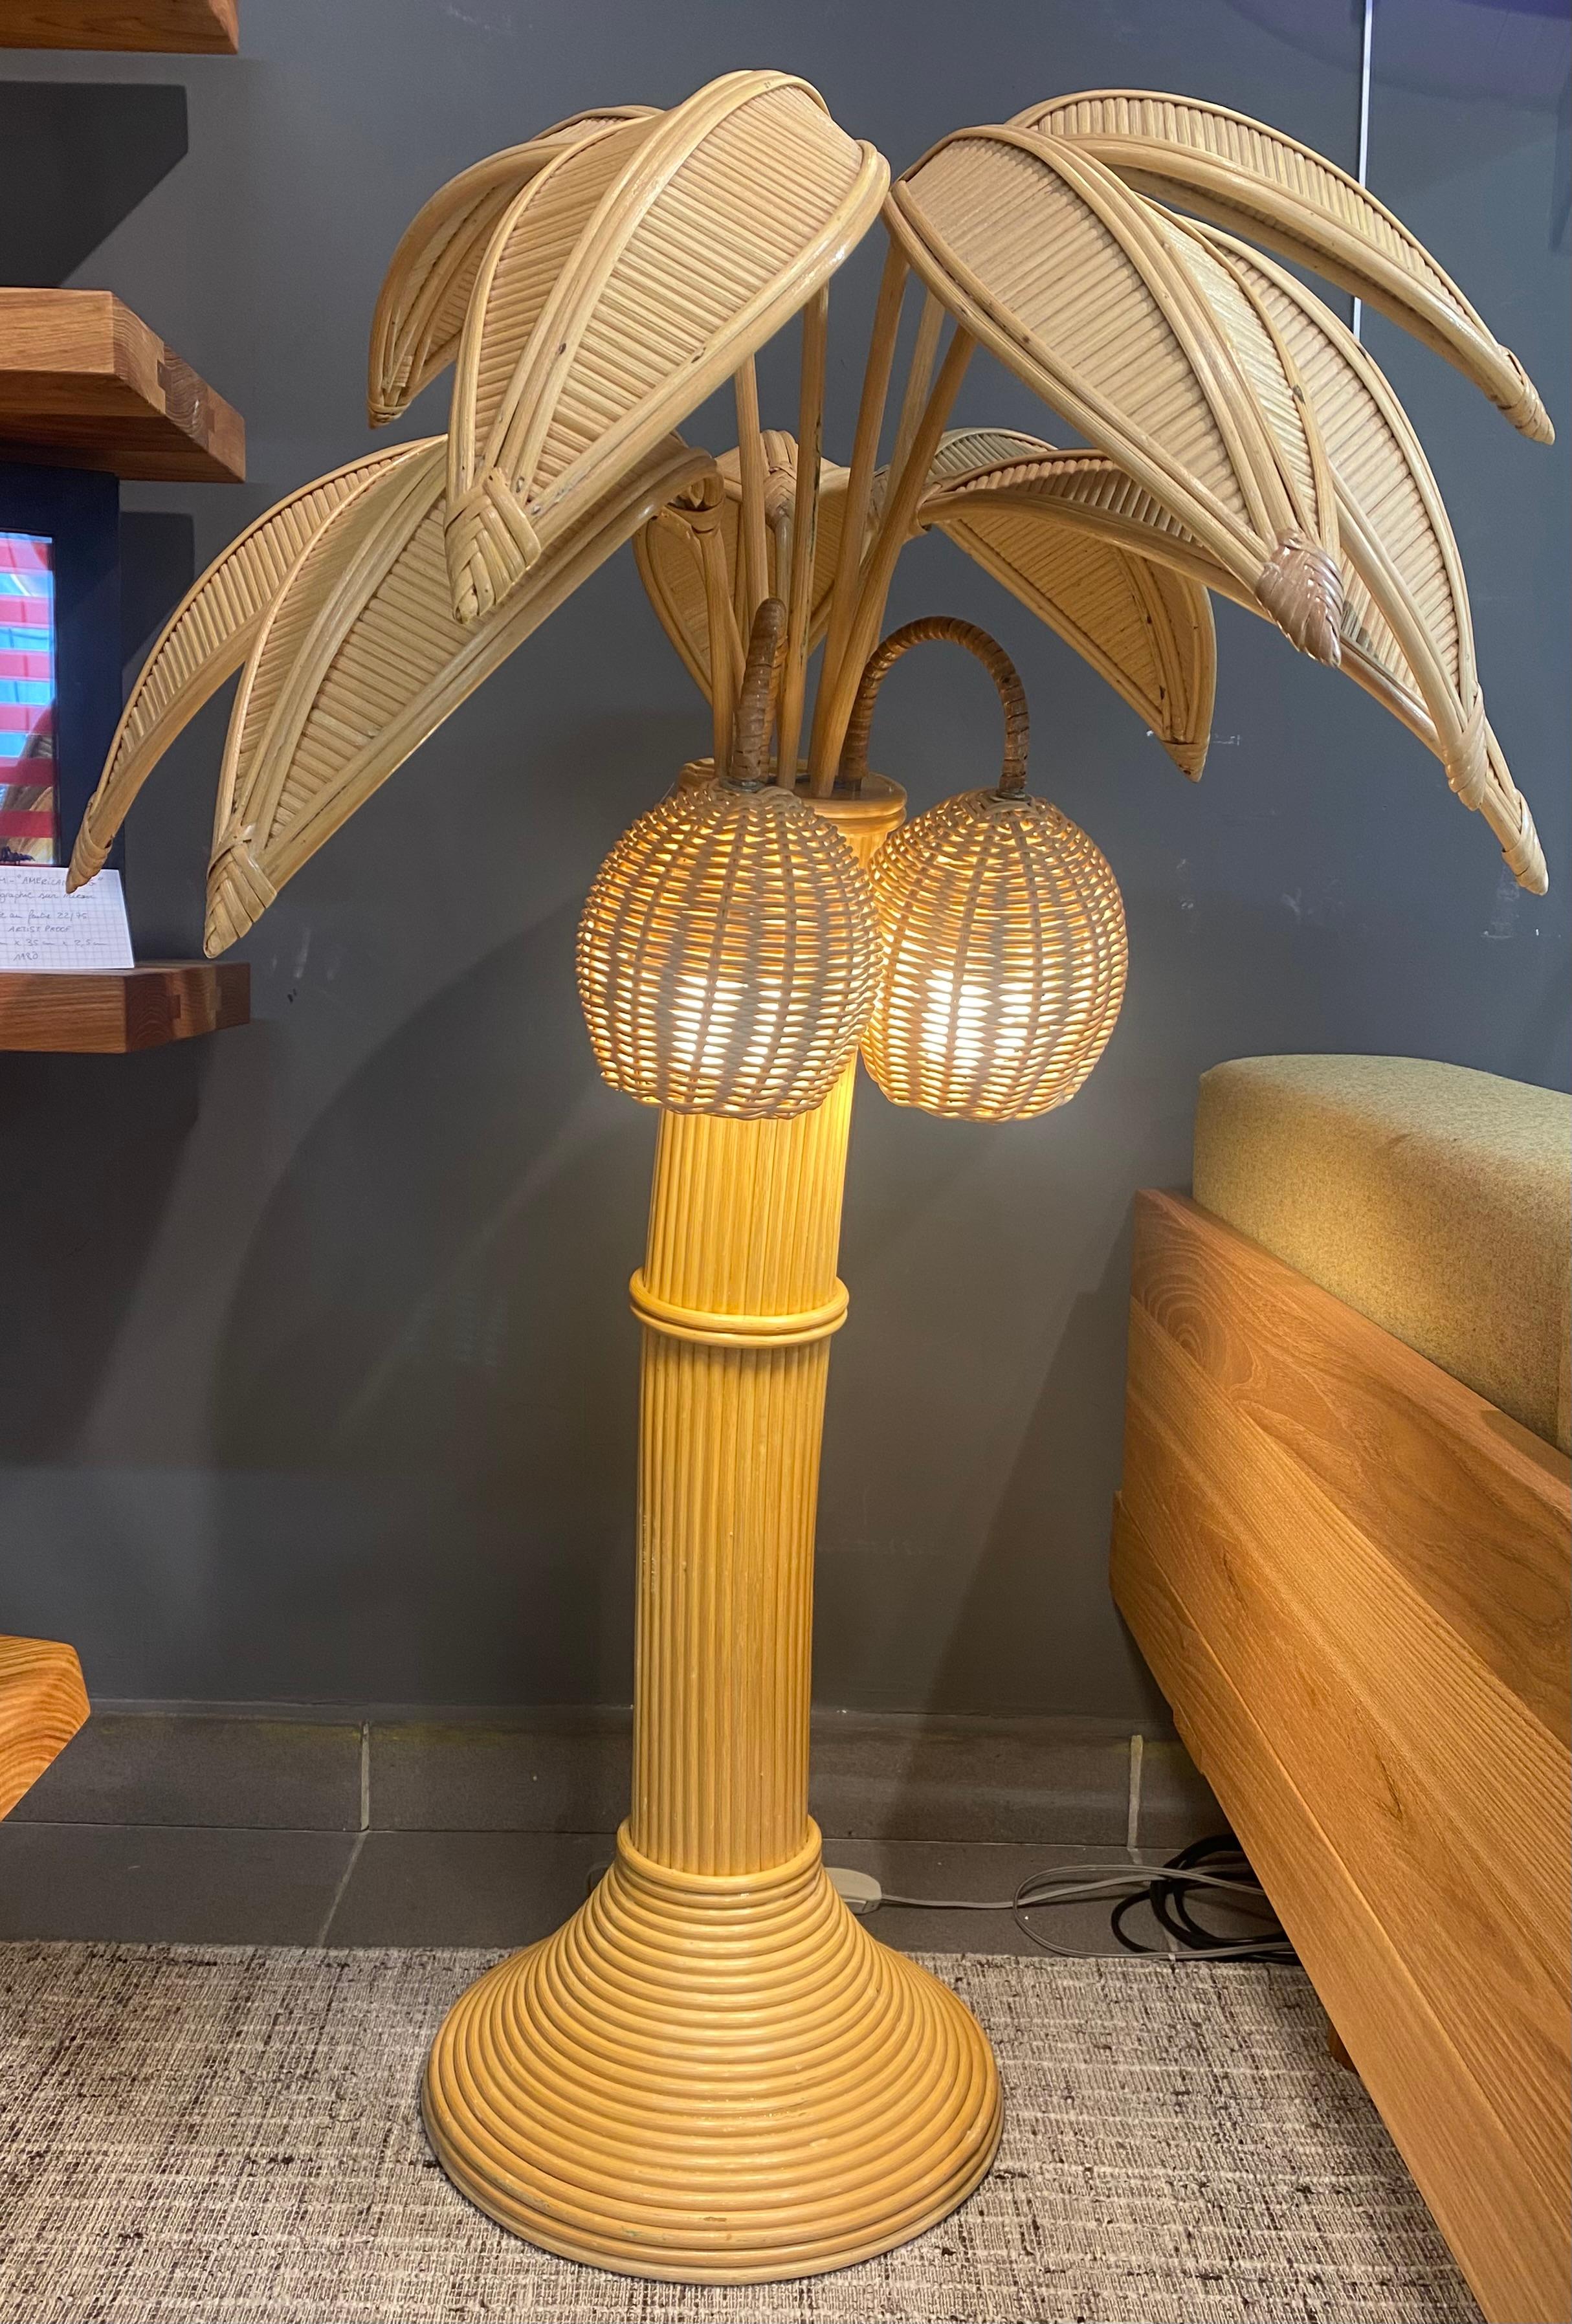 bamboo palm floor lamp 
circa 1980 
Dimensions : h 115 x w 95 x p 86cm
Ref : 4393/13
In very good condition